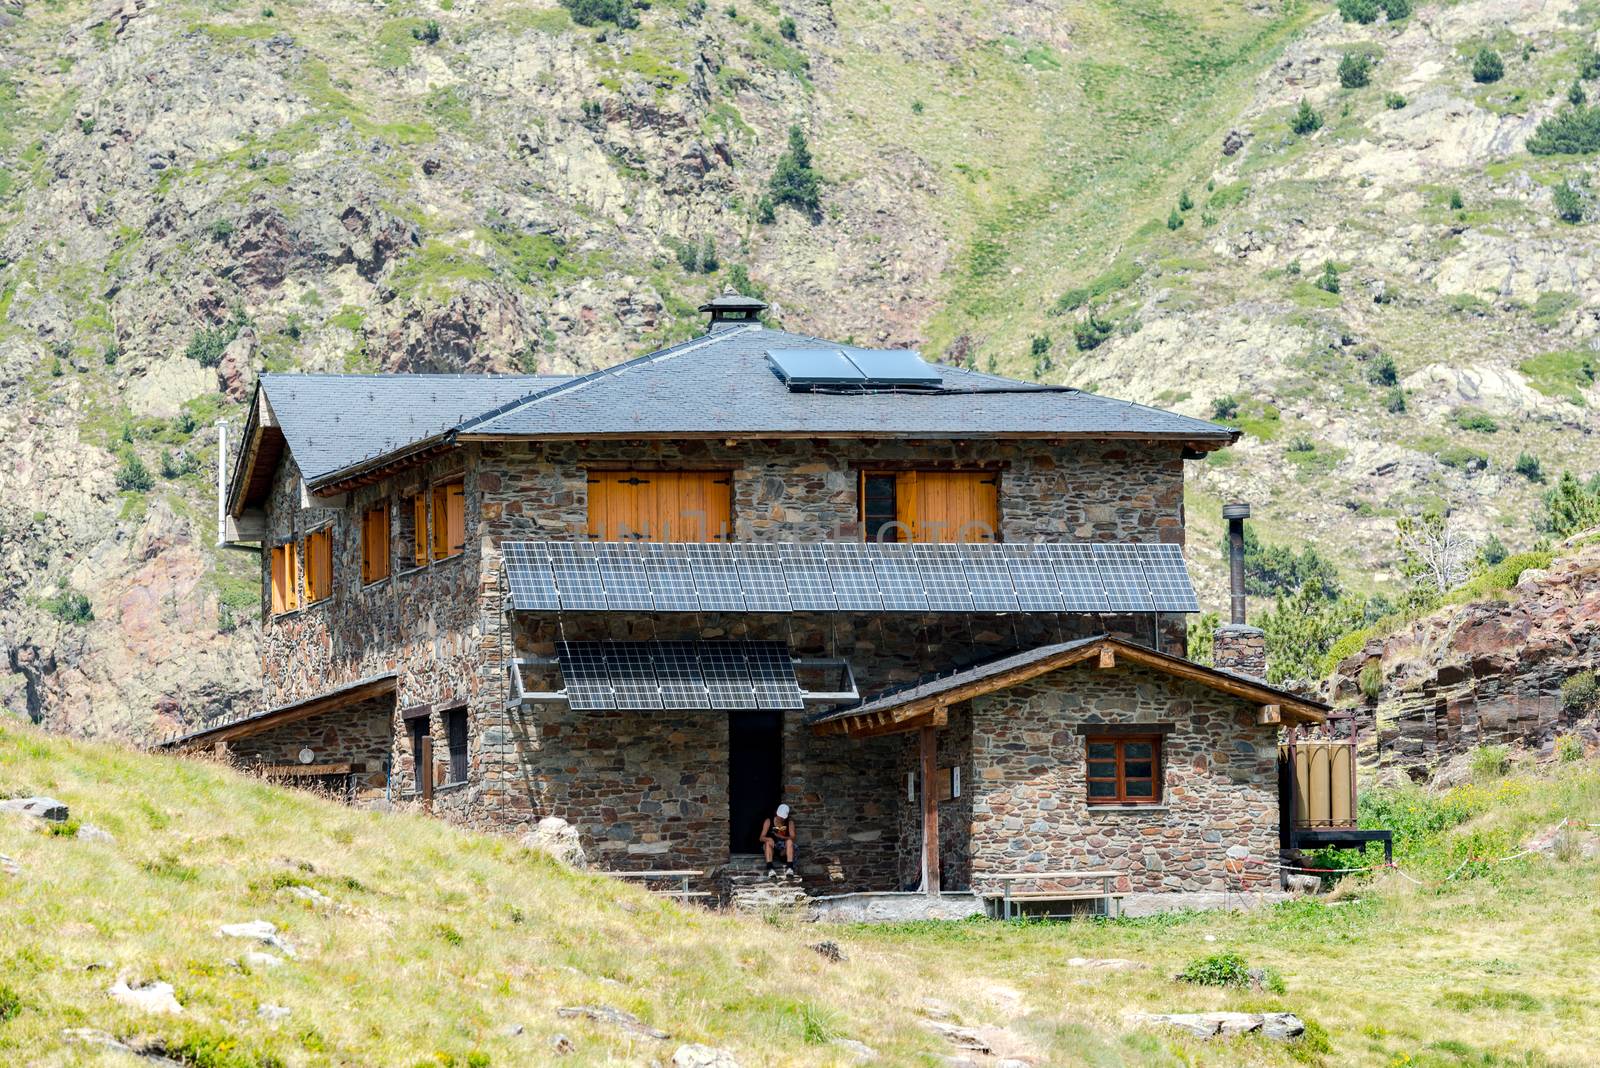 Coma Pedrosa, Andorra : 02 August 2020 : Coma Pedrosa refuge at 2266 meters of altitude in Andorra Pyrenees in summer 2020.